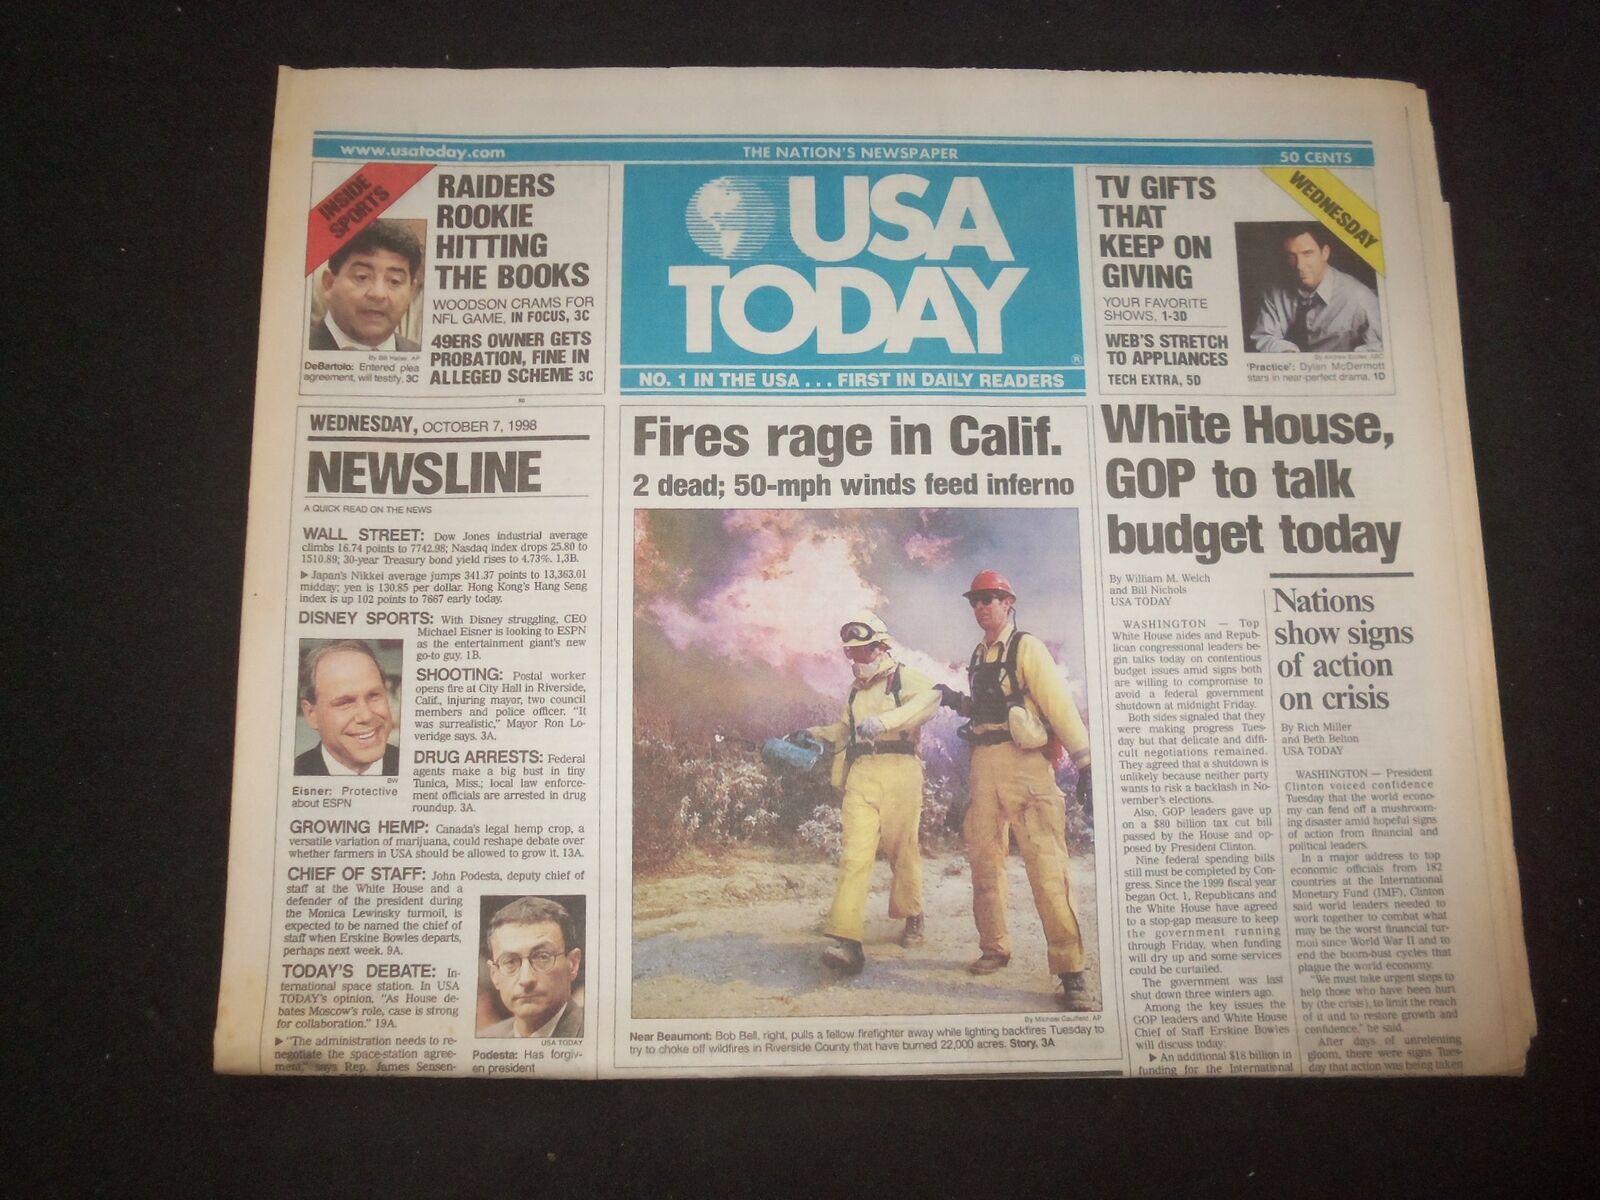 1998 OCTOBER 7 USA TODAY NEWSPAPER - FIRES RAGE IN CALIFORNIA, 2 DEAD - NP 7956